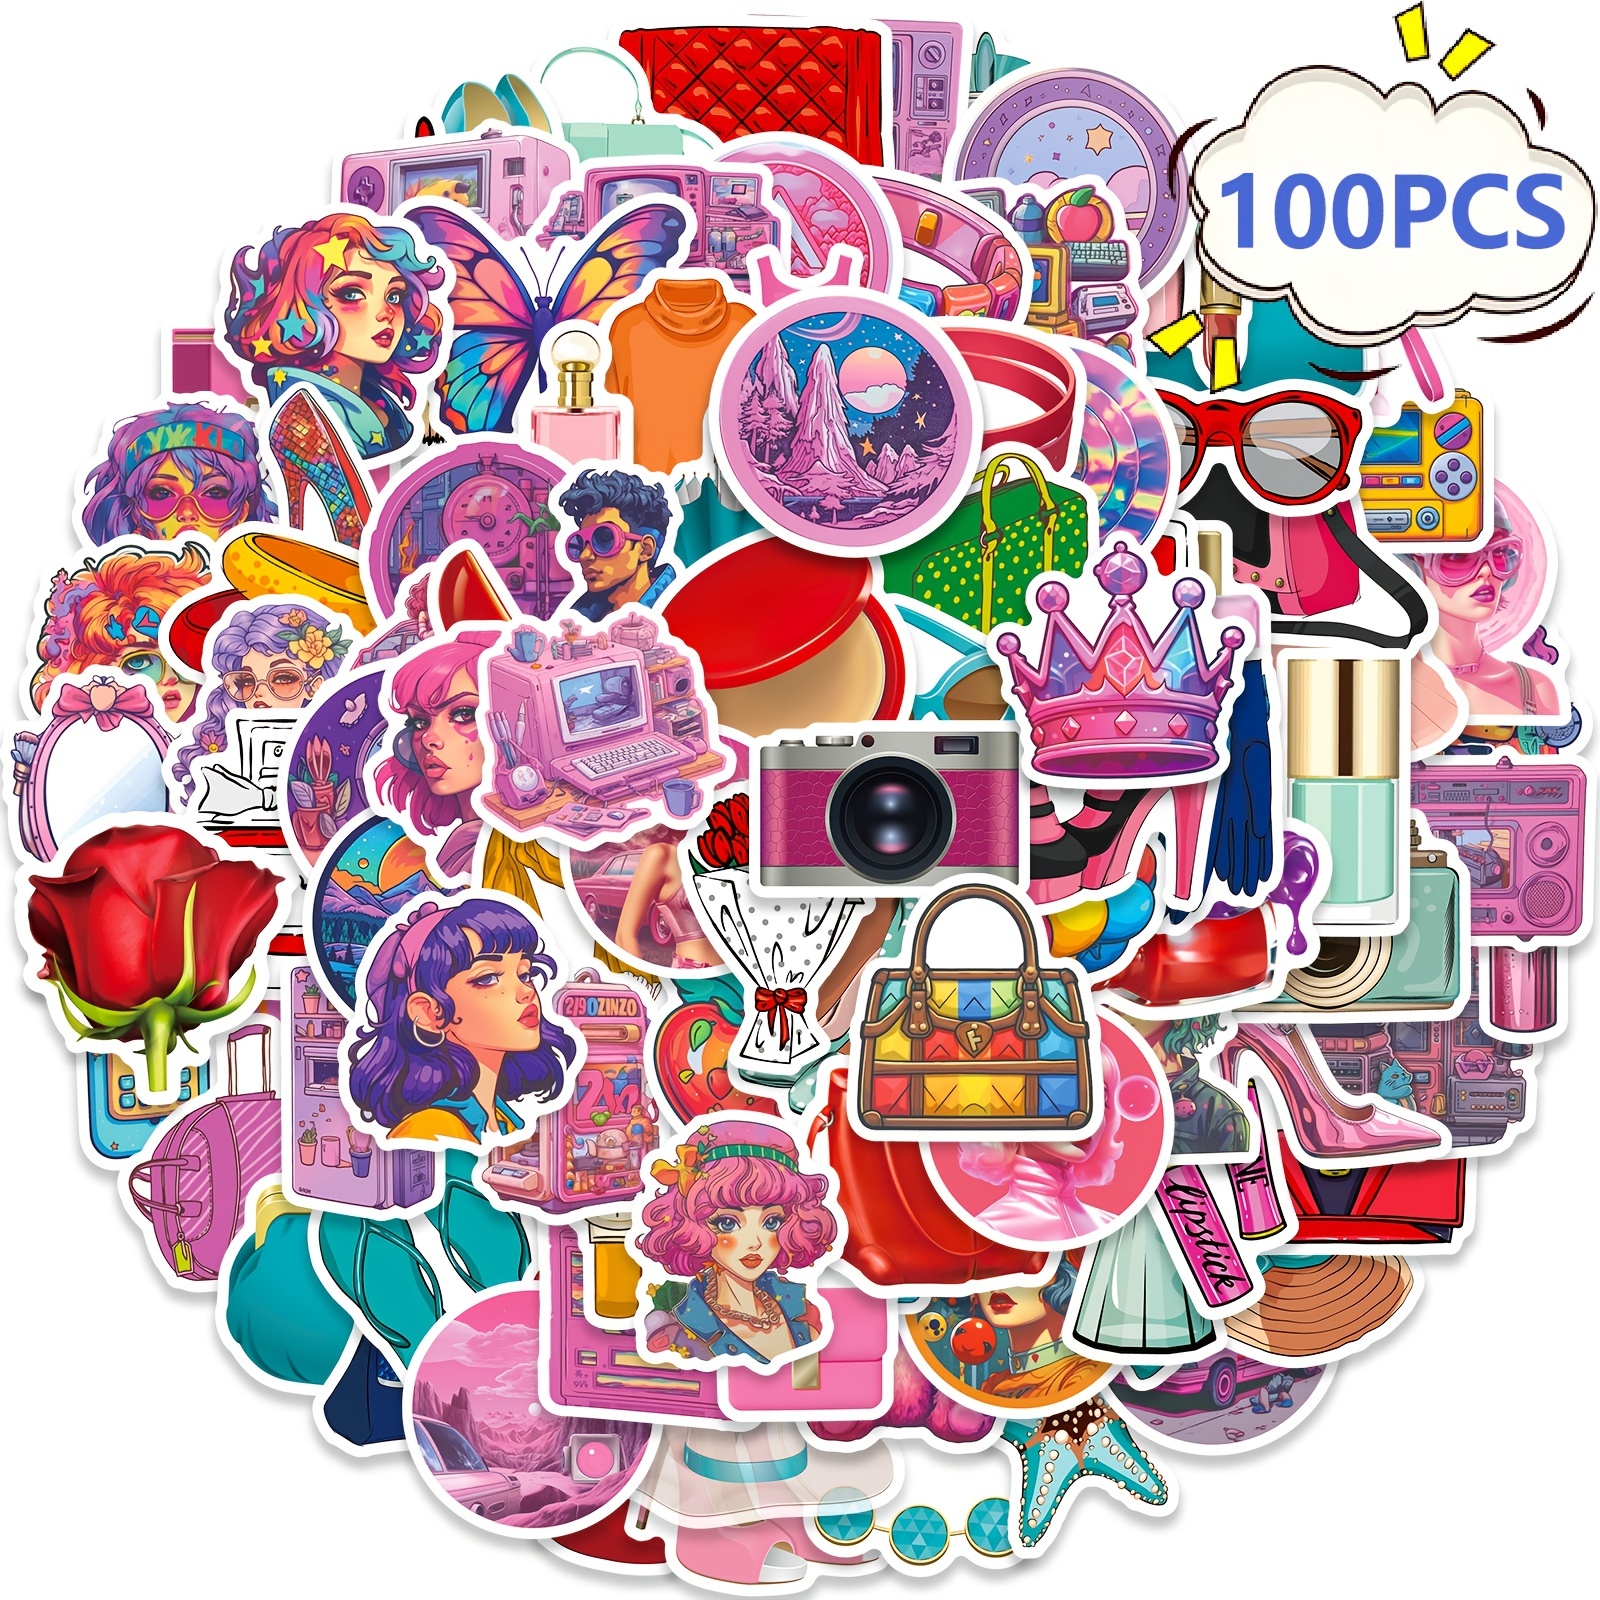  52PCS Y2k Aesthetic Stickers, Cyber 2000s Fashion Sticker,Water  Bottles Laptop Car Decal ，Perfect Gifts for Girls and Teenagers Cute Vsco  Stickers : Electronics